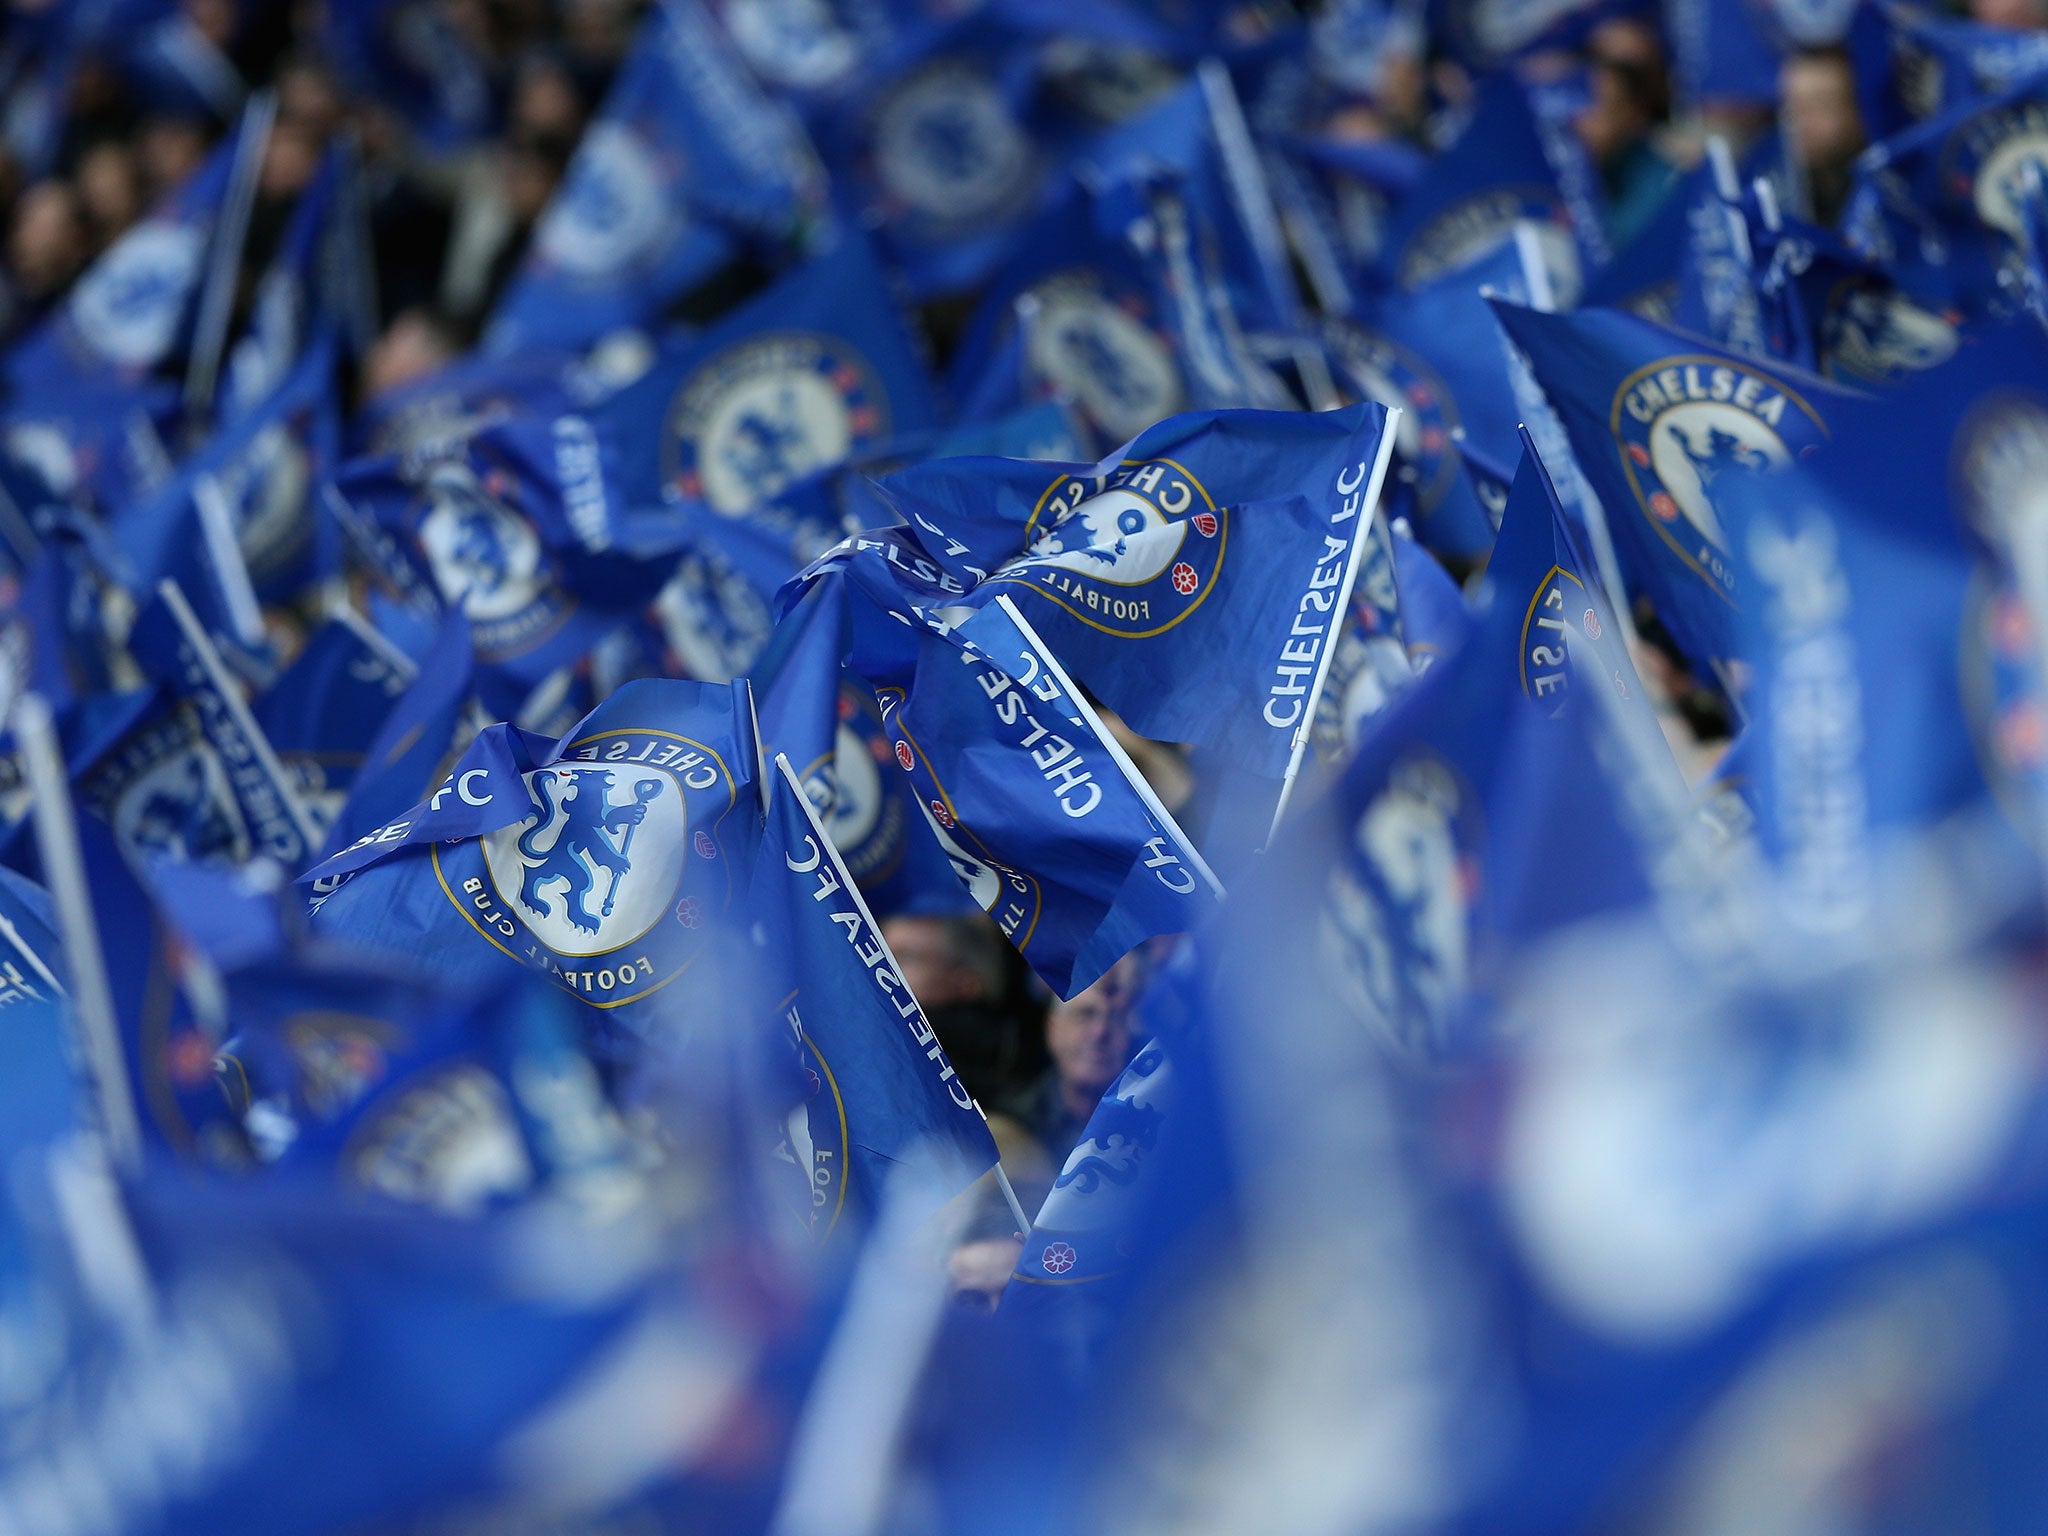 Chelsea fans wave flags before kick-off at Wembley